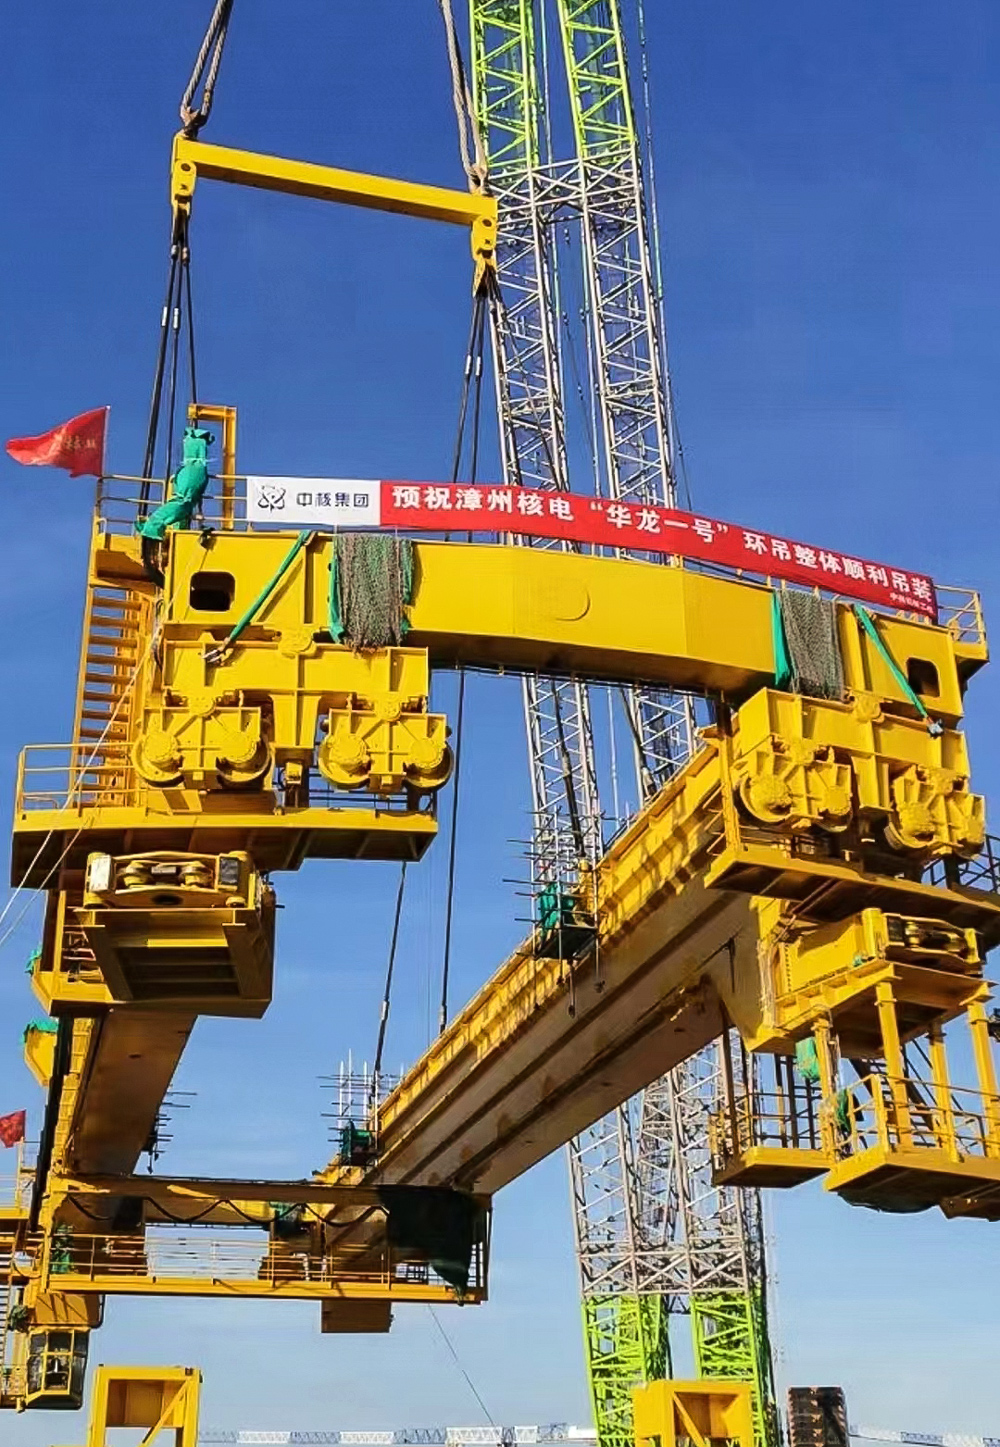 crane-installation-at-nuclear-power-plant